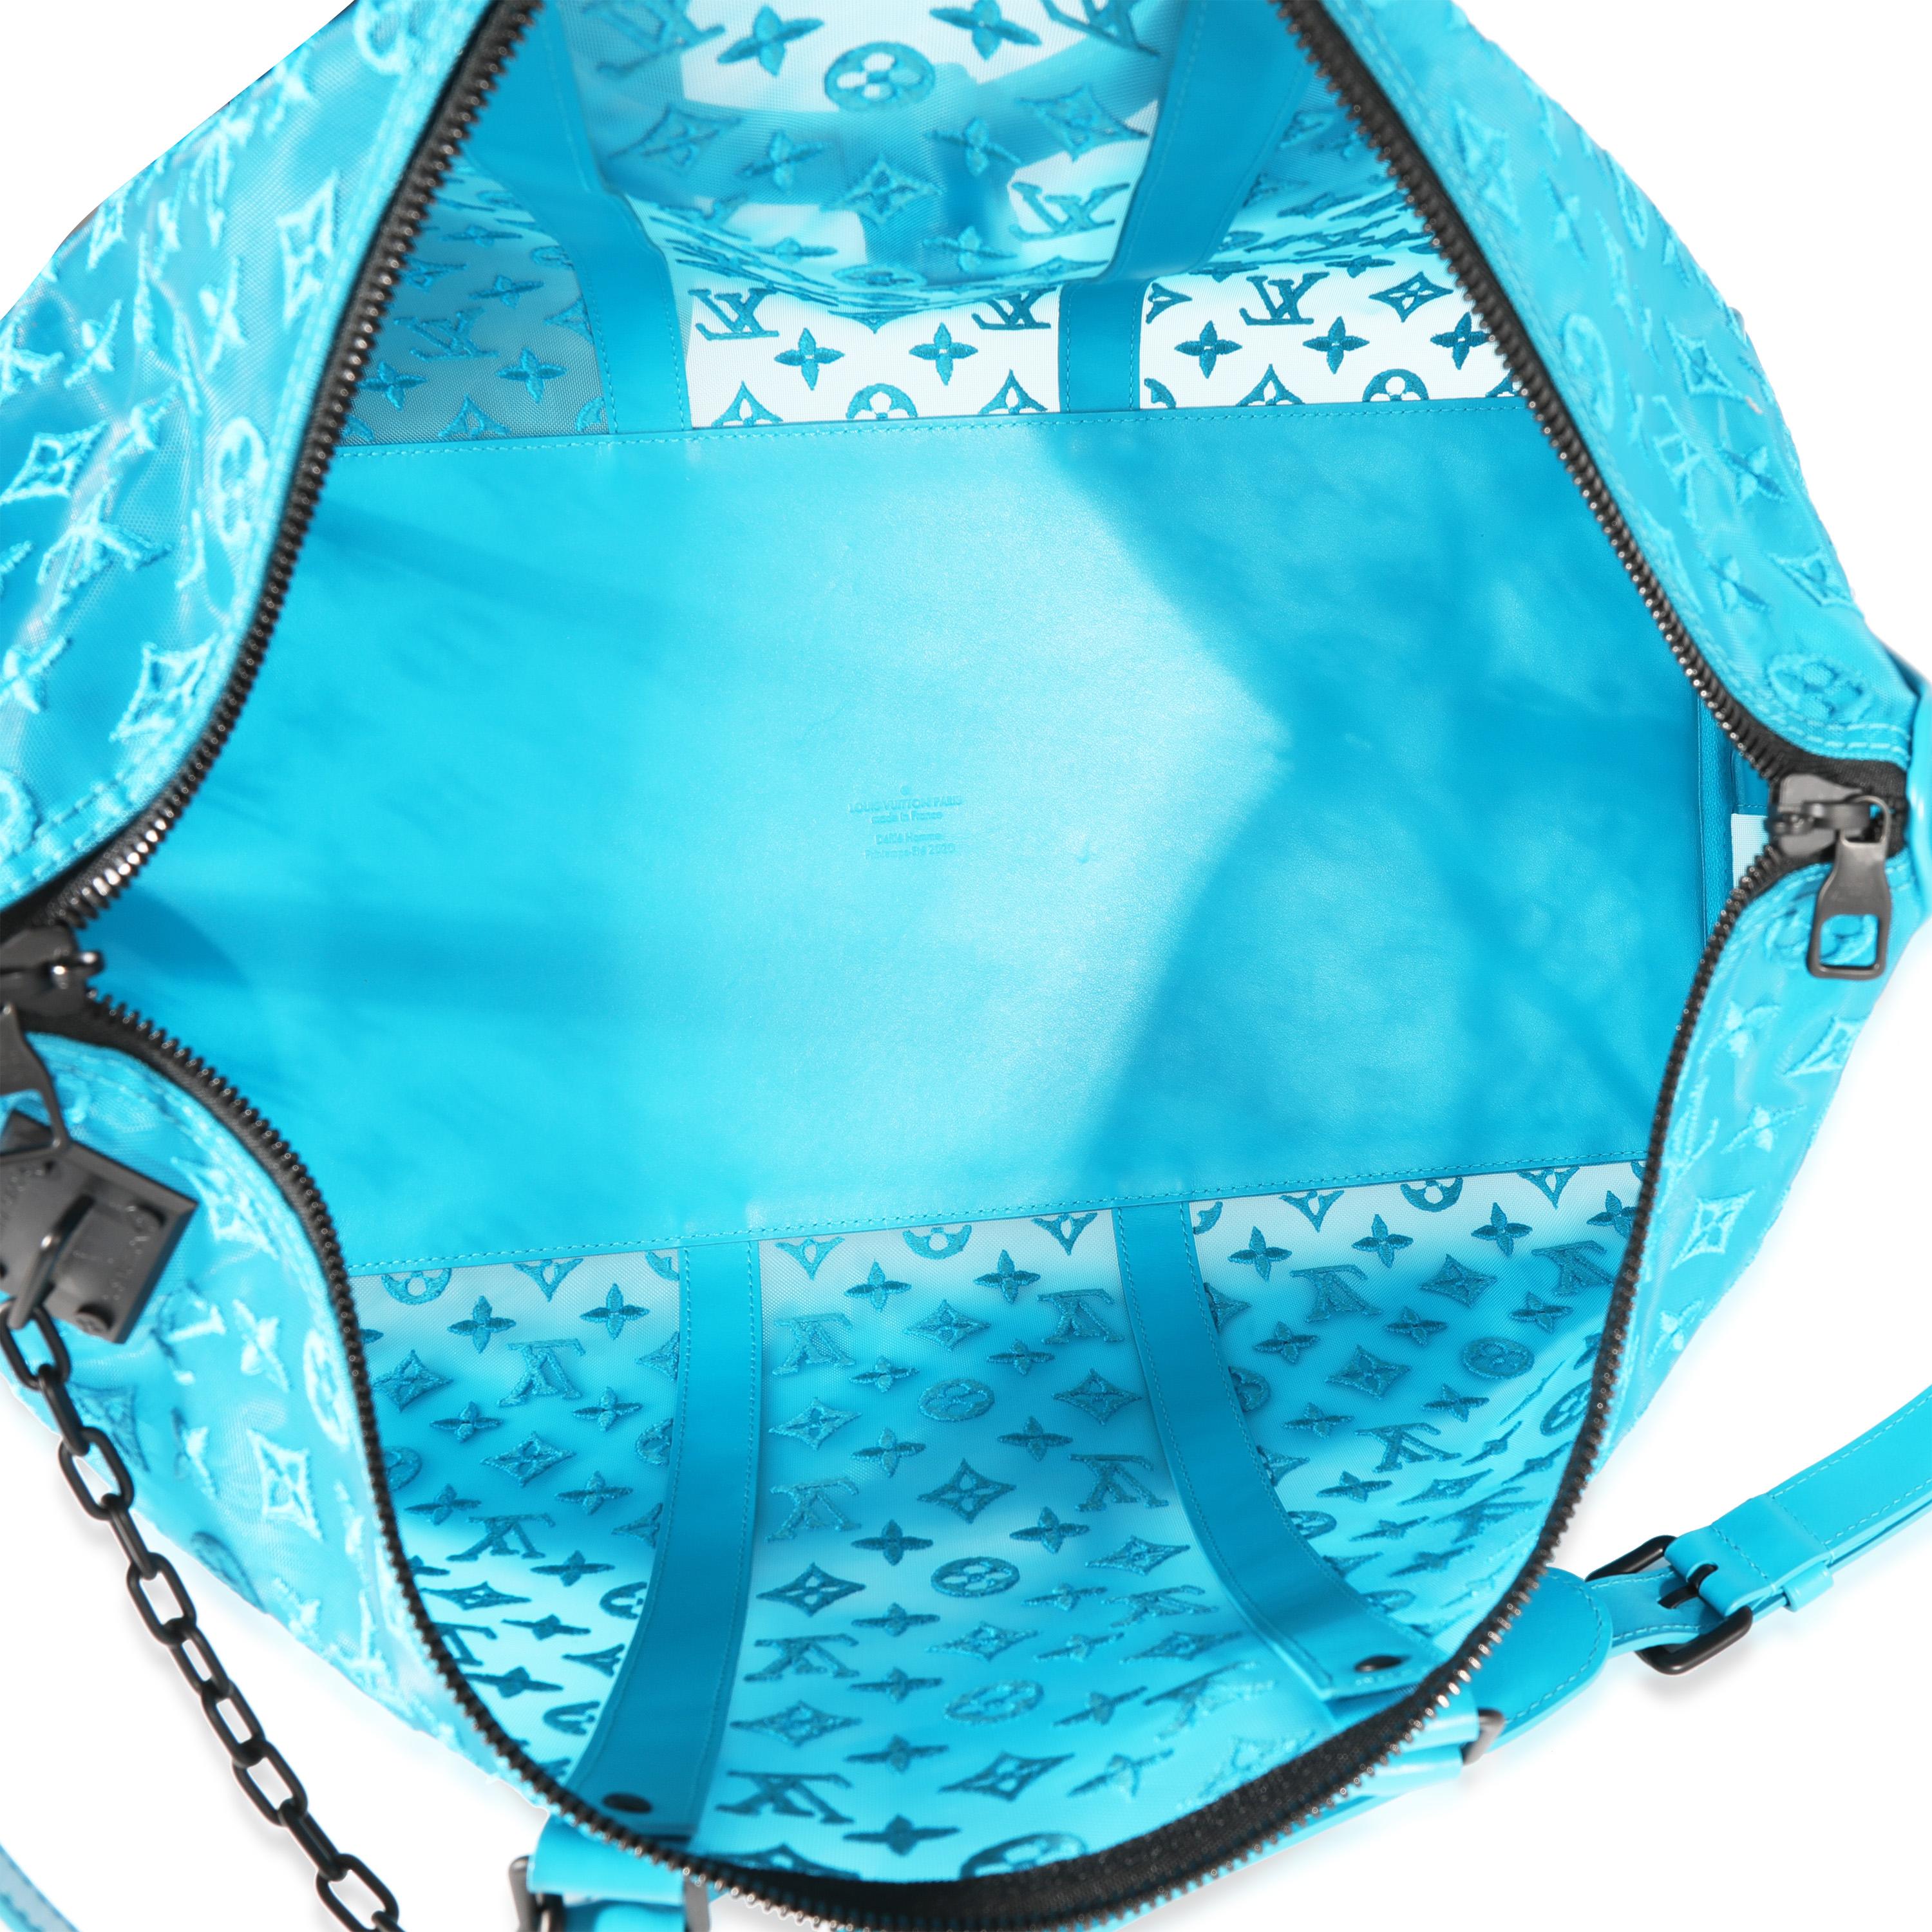 Listing Title: Louis Vuitton Blue Monogram Mesh Triangle Keepall Bandoulière 50
SKU: 122168
Condition: Pre-owned 
Handbag Condition: Excellent
Condition Comments: Excellent Condition. Scuffing at corners and at exterior. Light scratching at